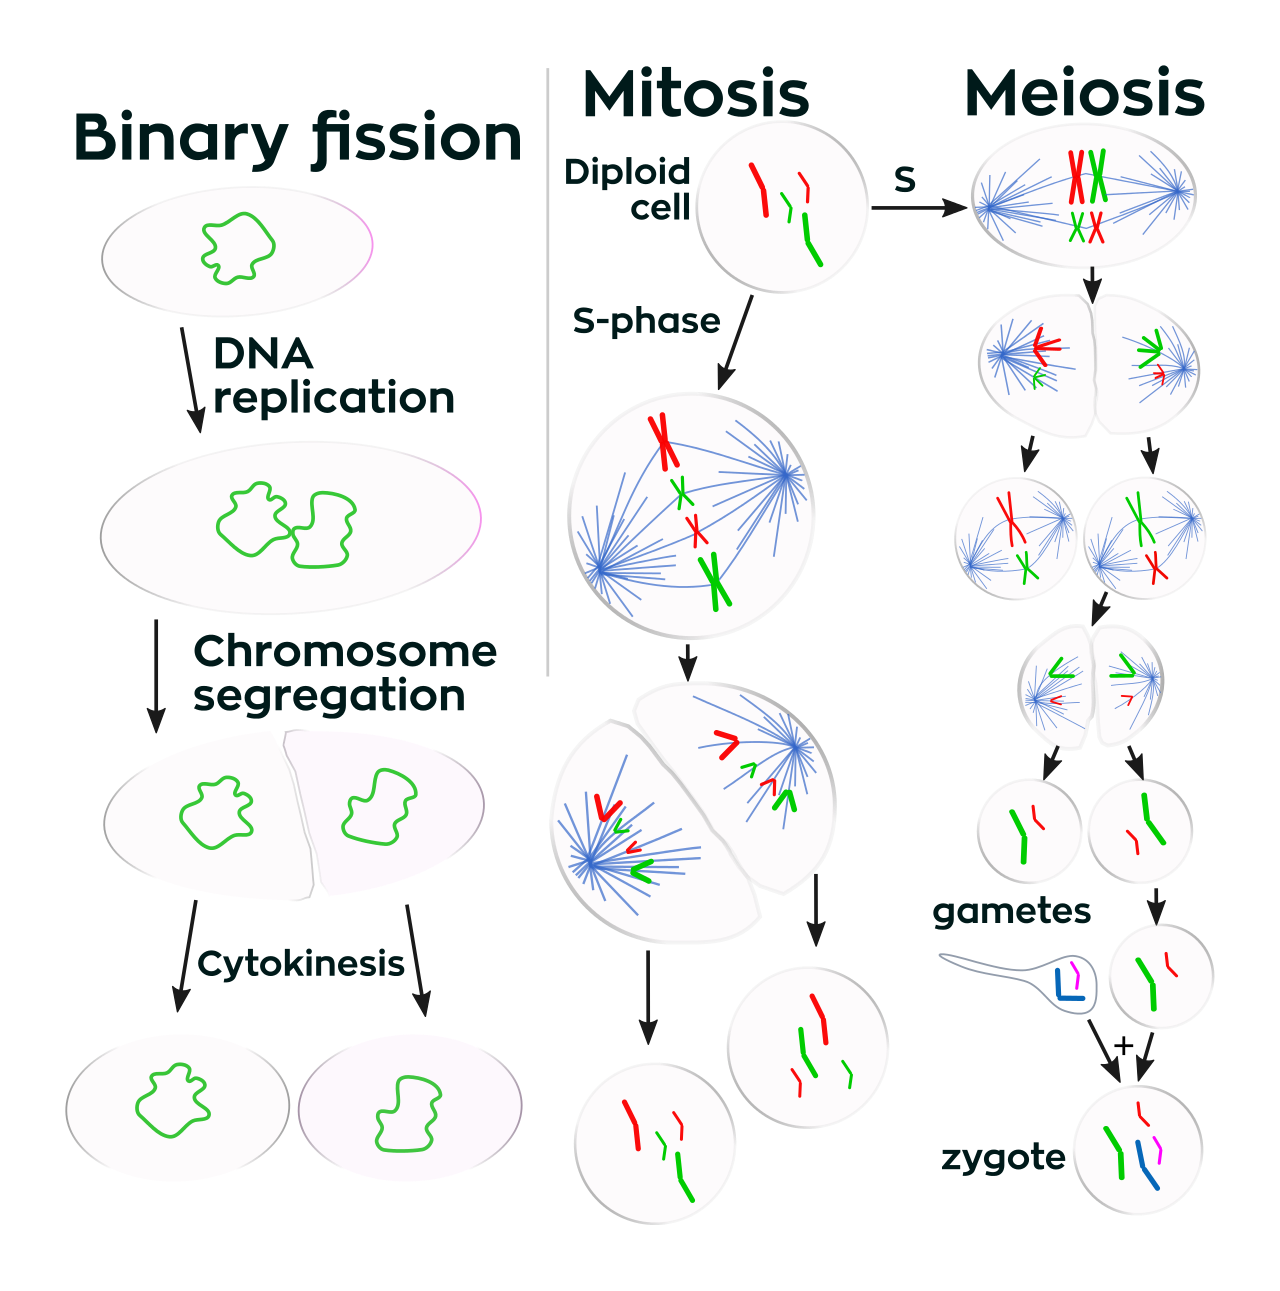 A few types of cell division: Binary Fission, Mitosis, and Meiosis